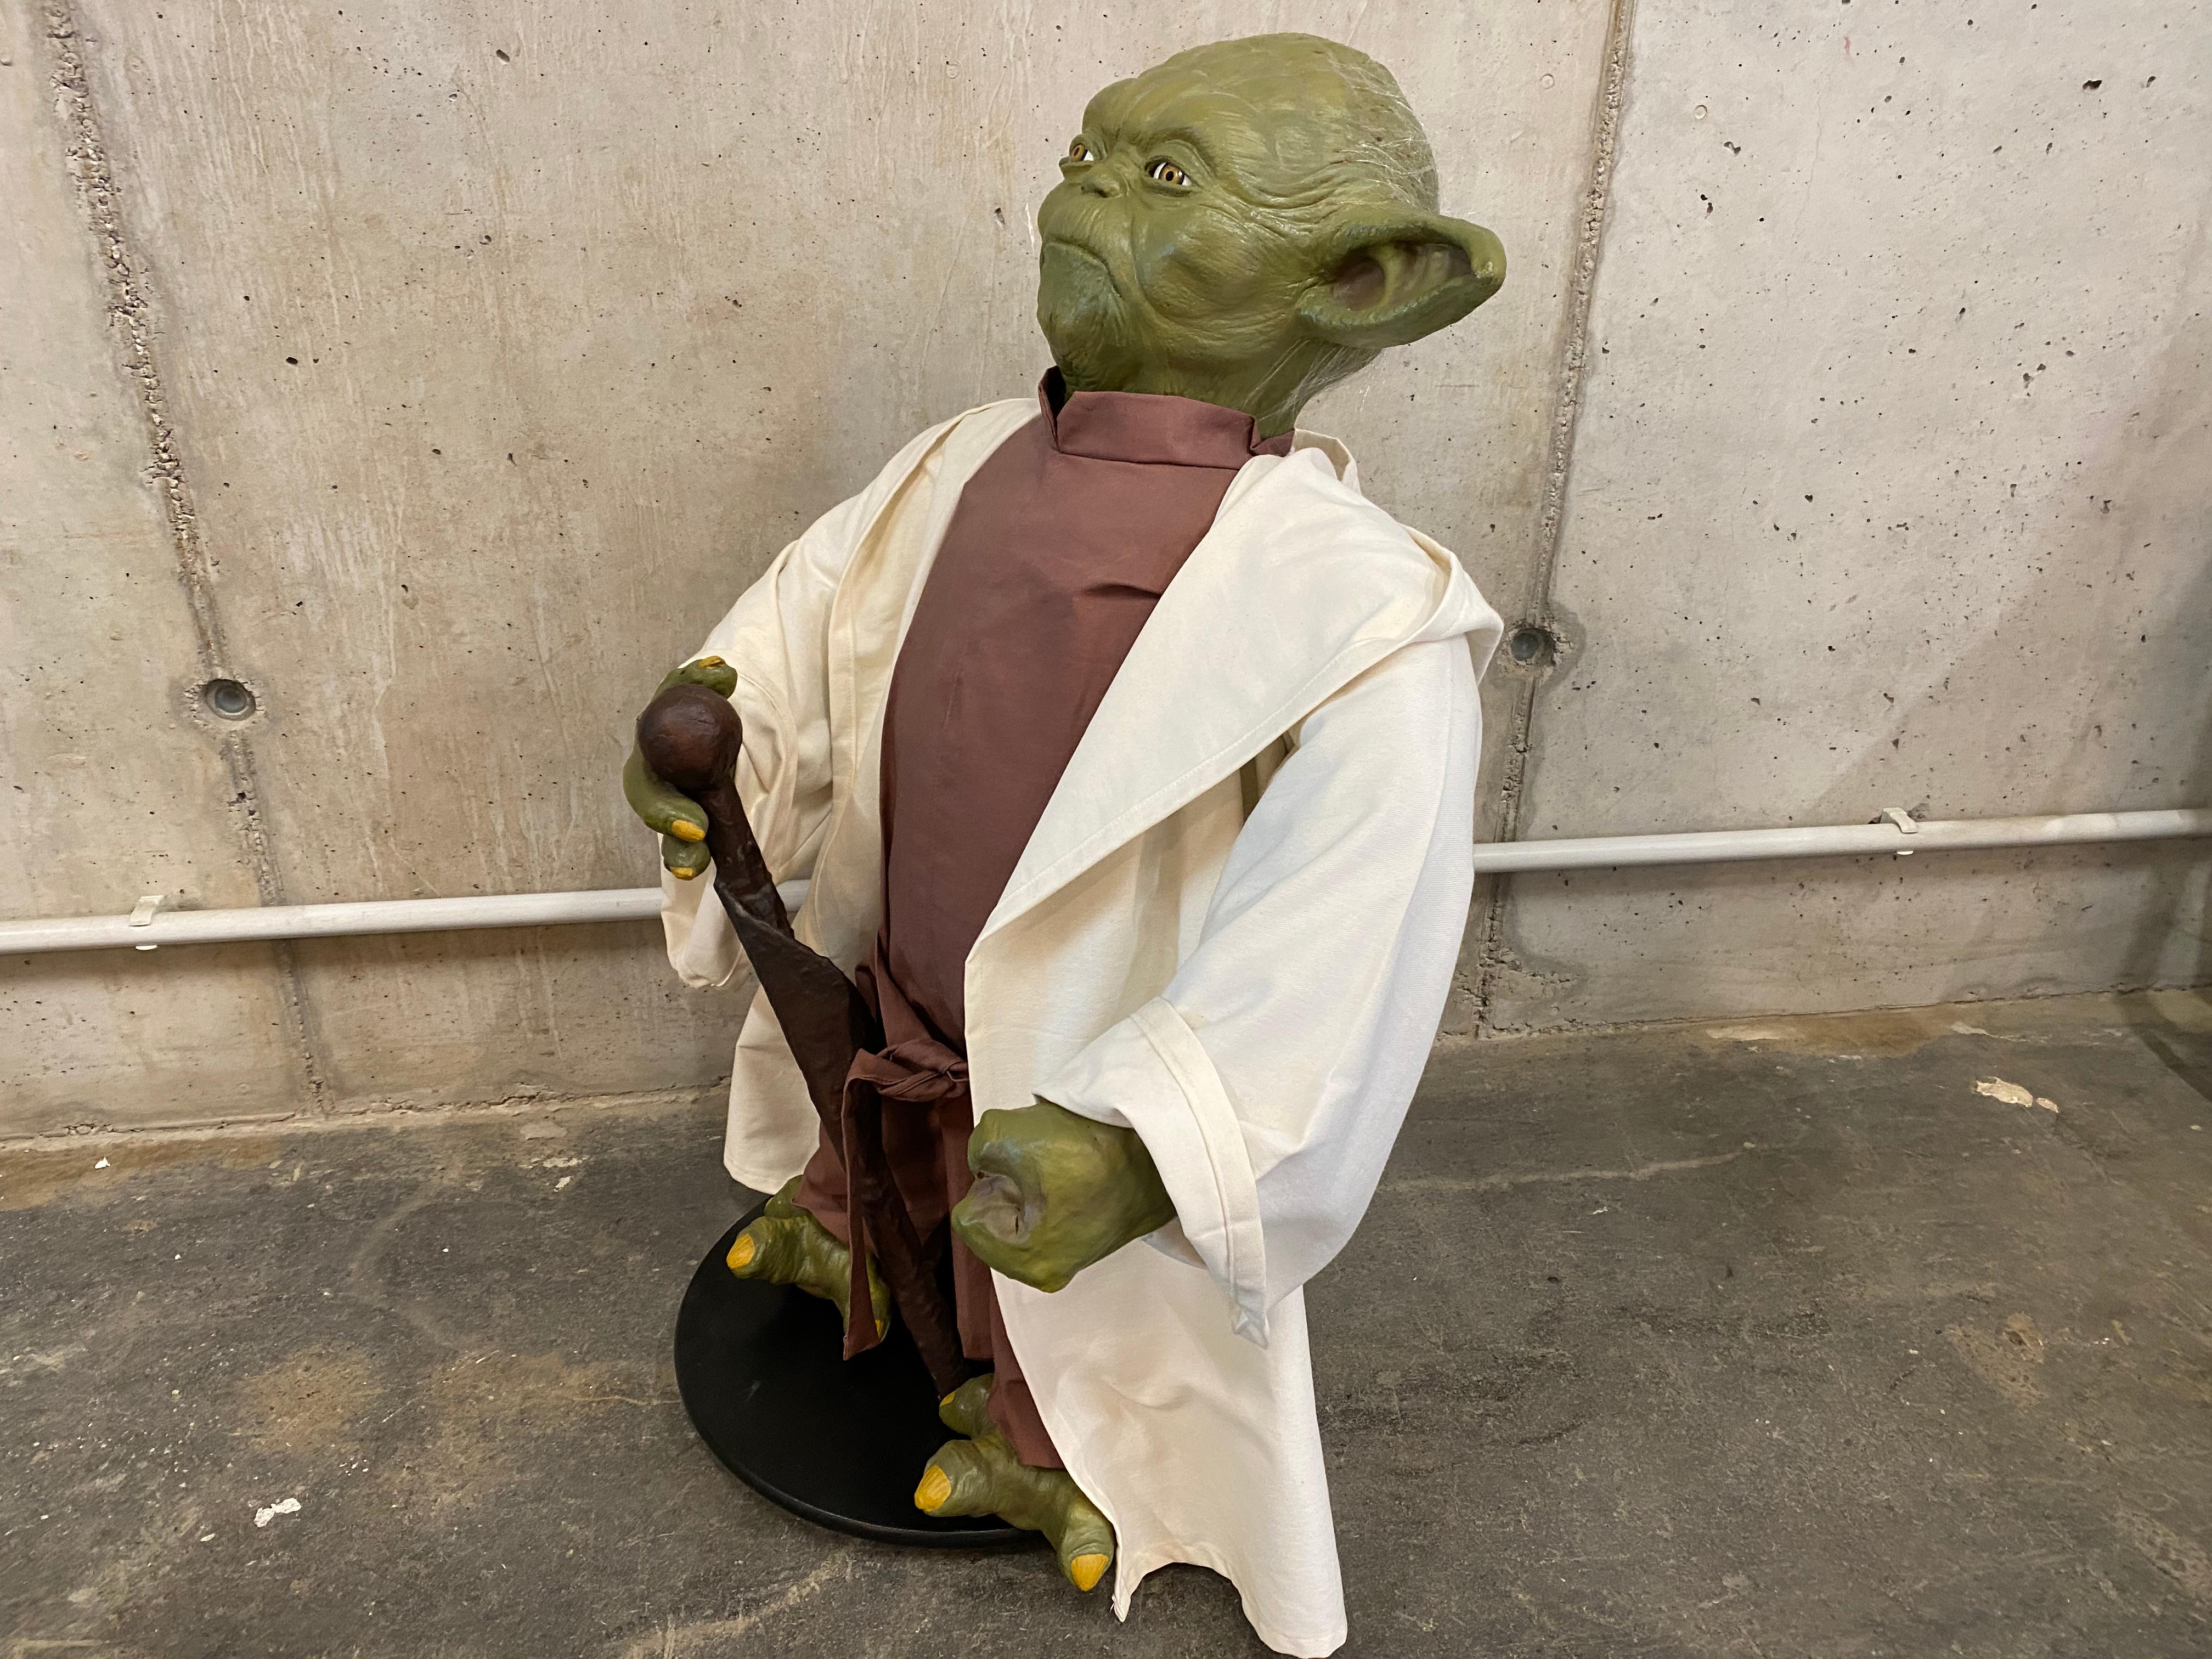 Life Size Yoda Figure, Edition of 50, Could Be Star Wars Photo Requisite In Fair Condition For Sale In Hamburg, DE